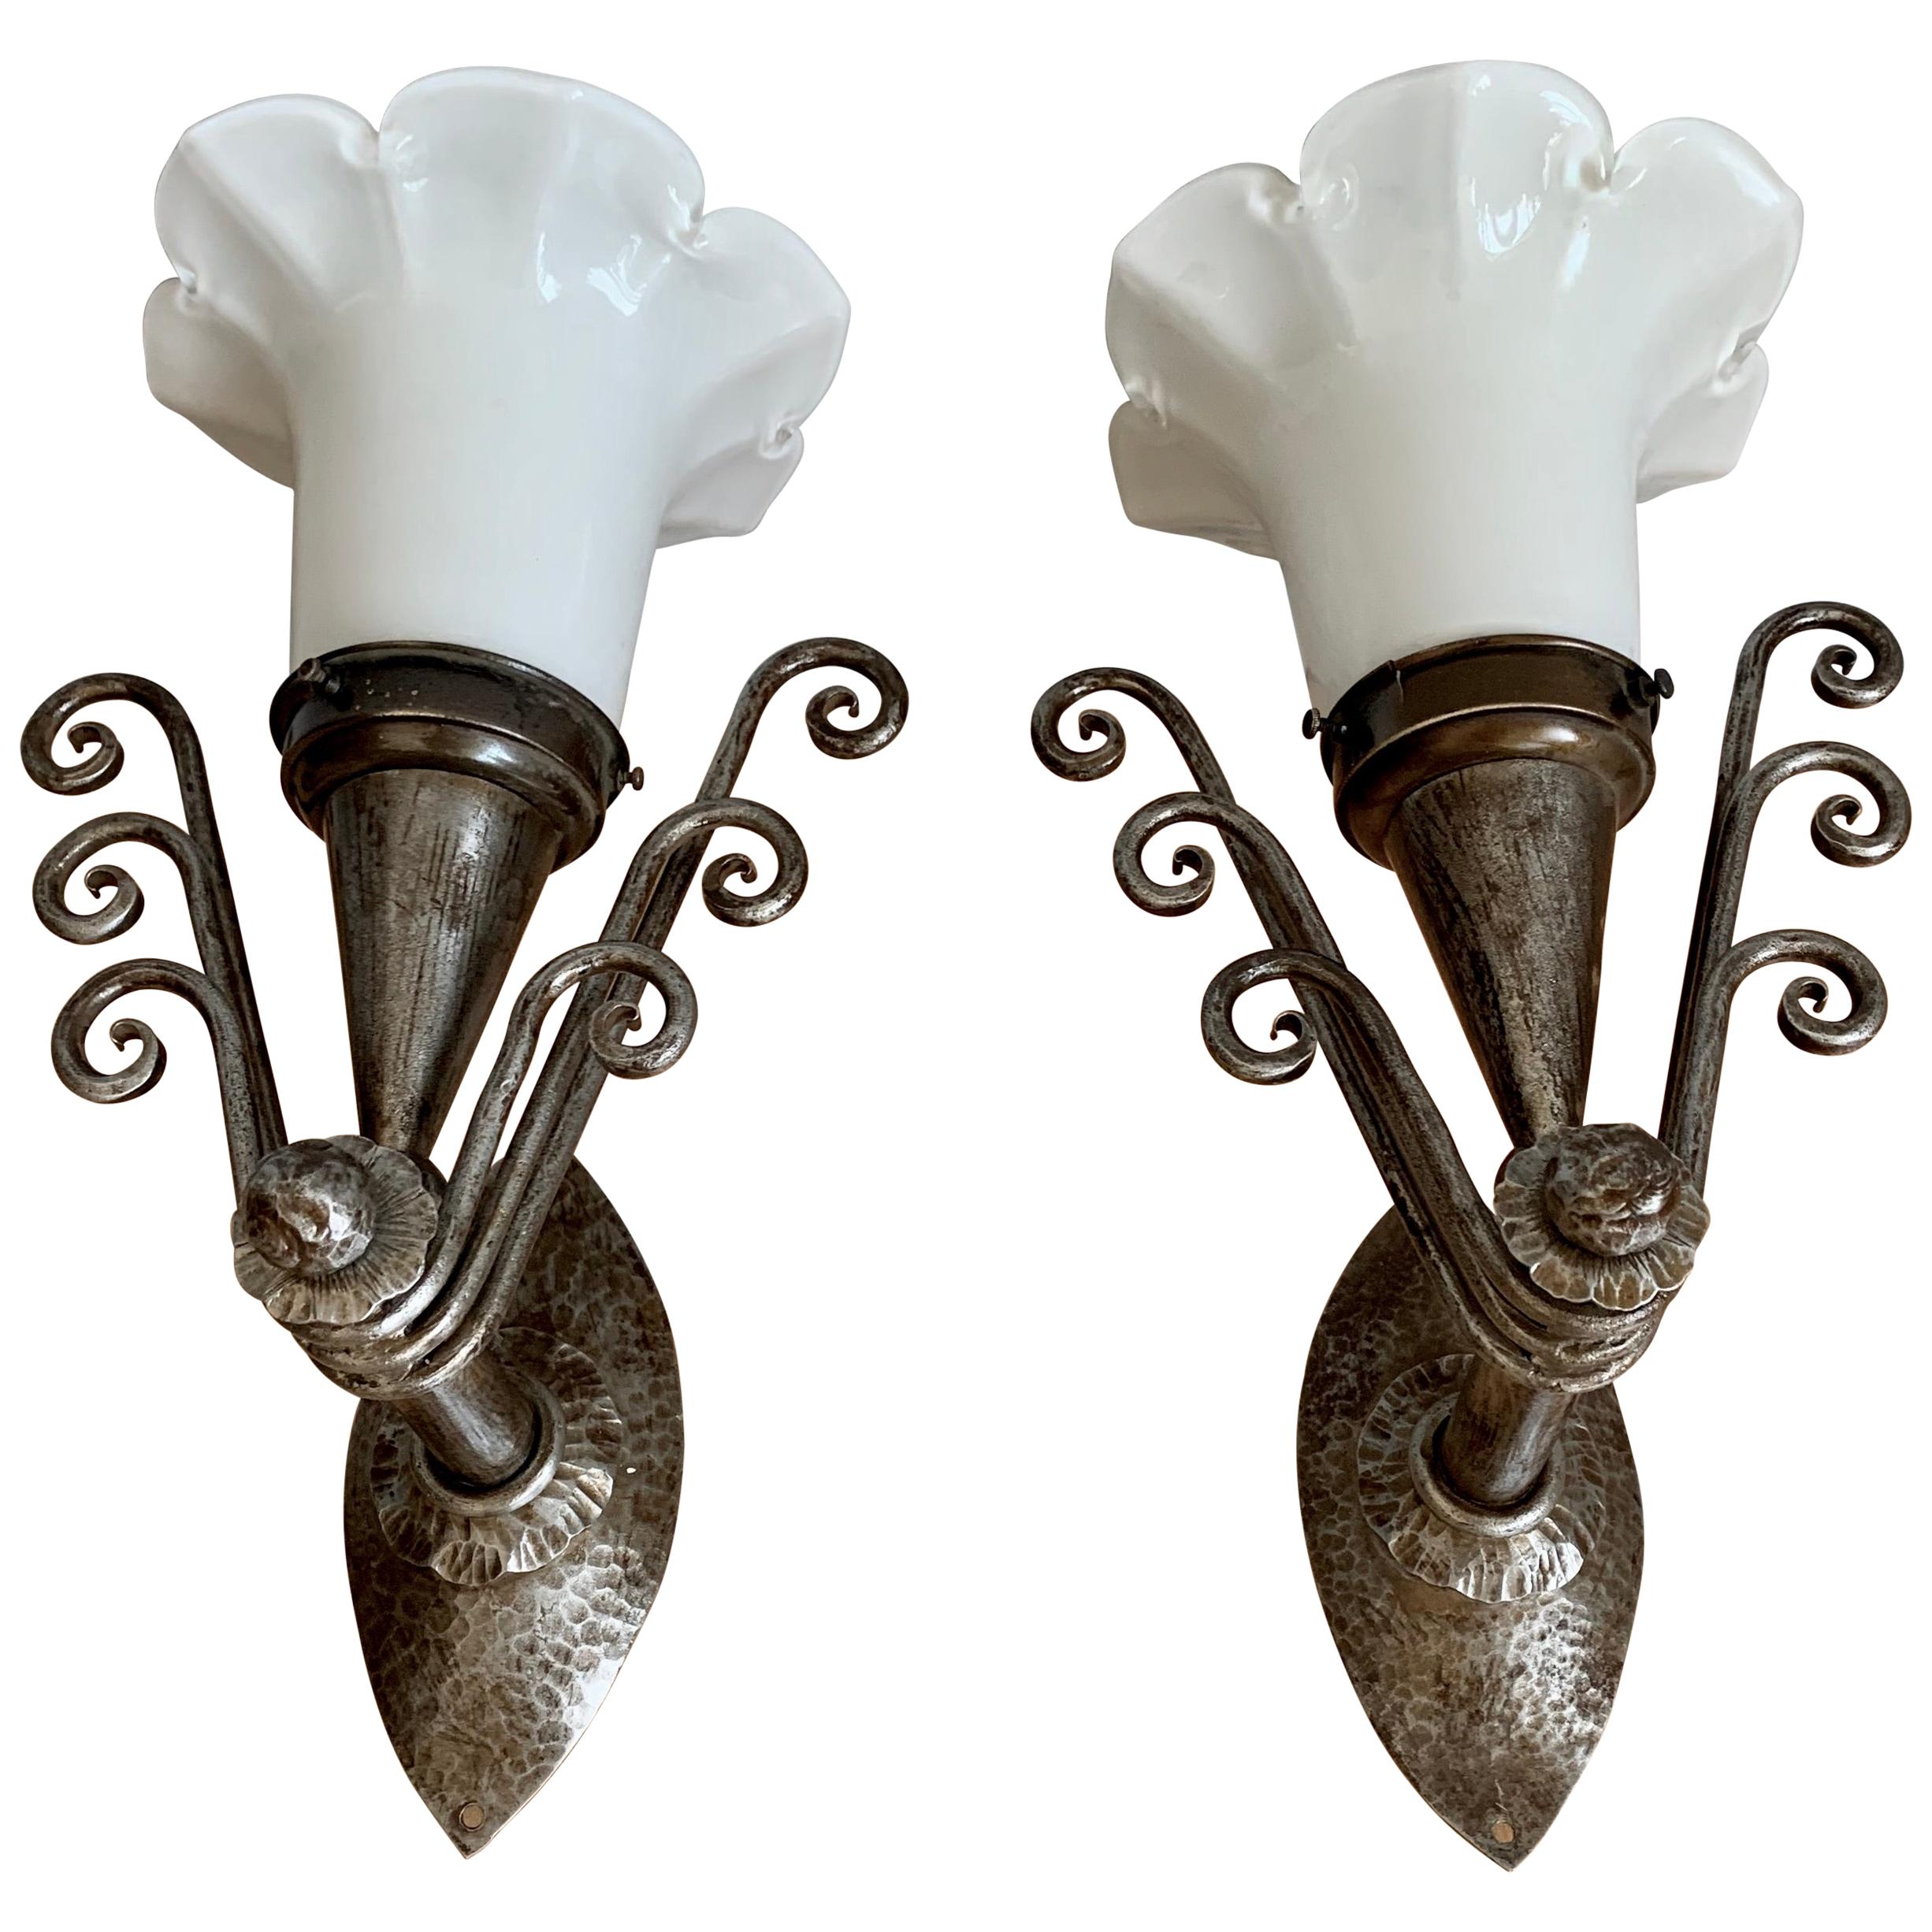 Striking Arts & Crafts Wrought Iron Wall Sconces with Flowery Glass Shades, Pair